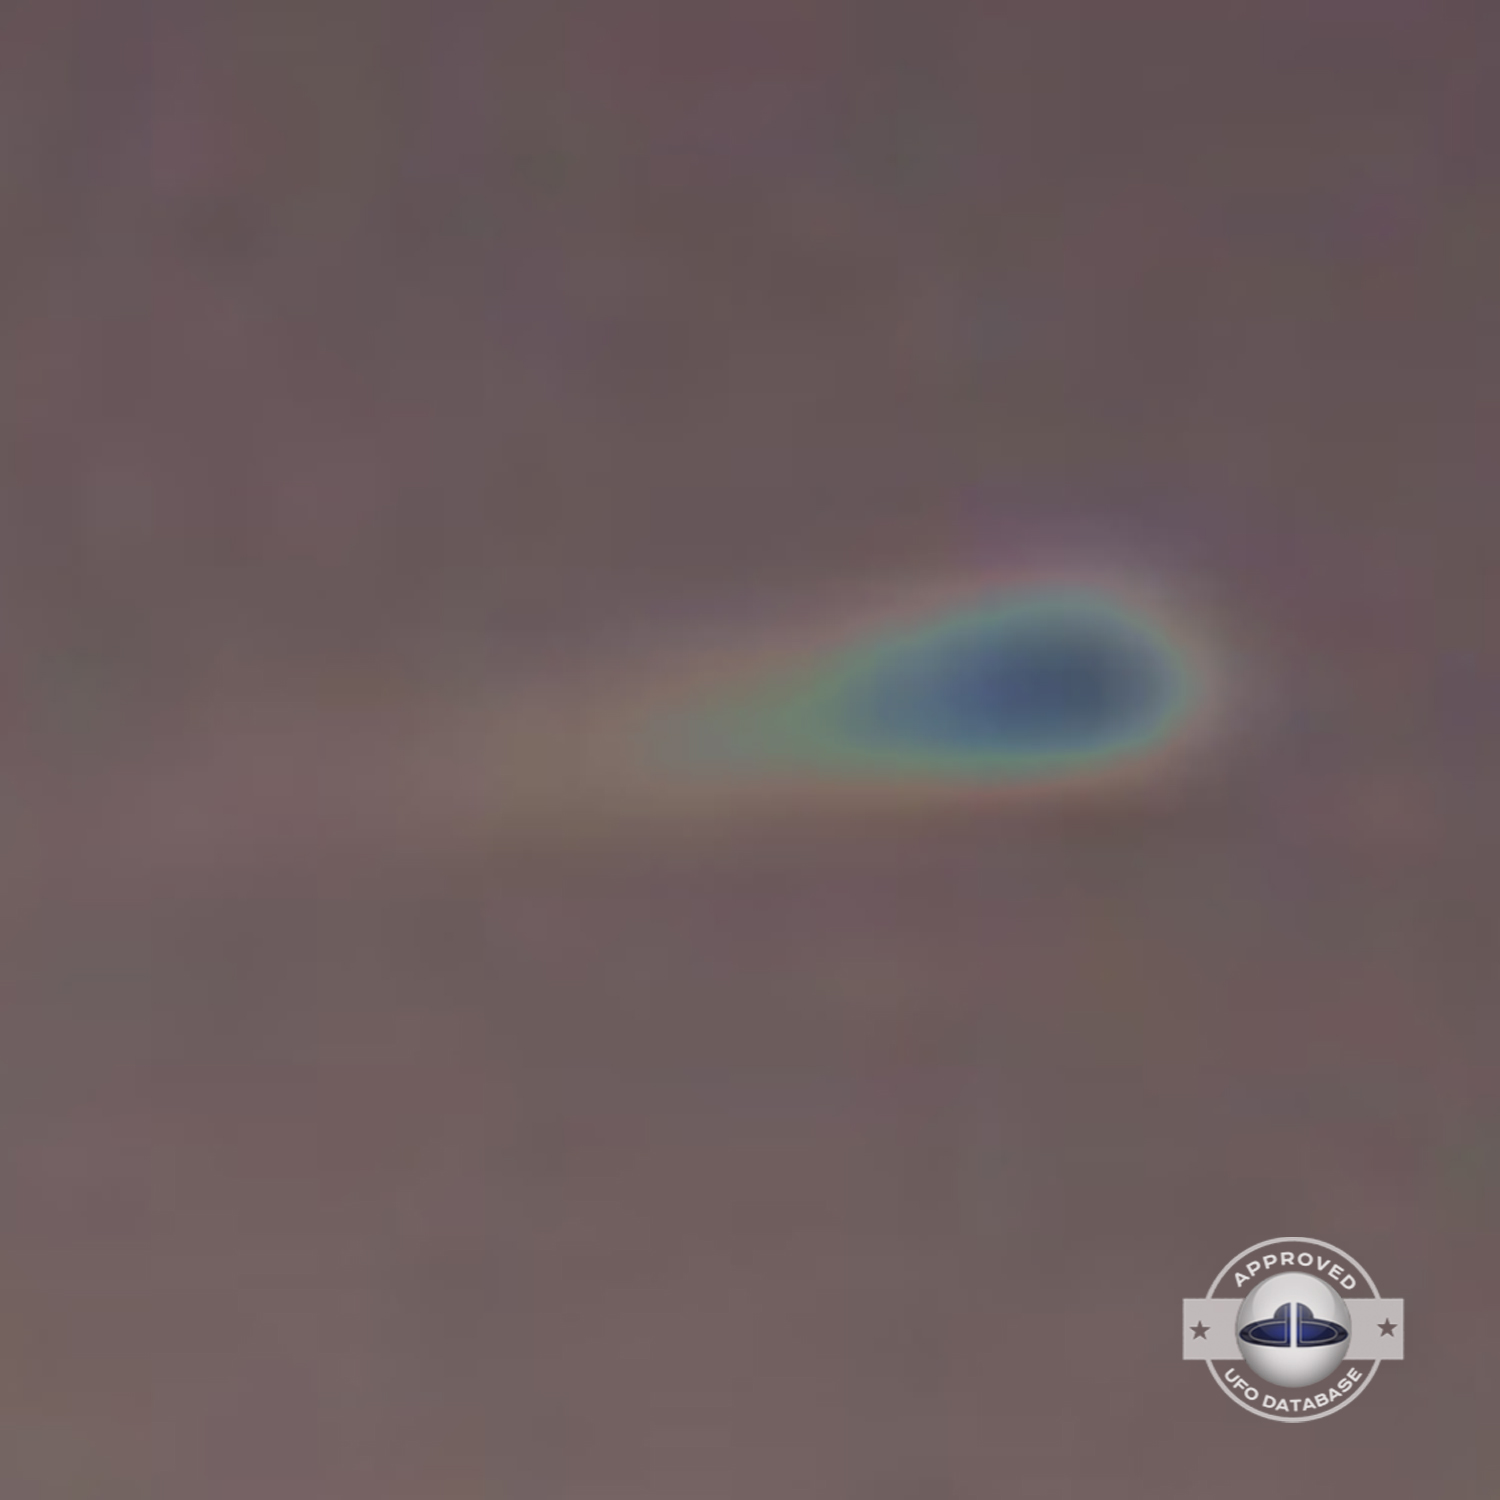 UFO flying over Uruguay in South America at night fall in 2008 UFO Picture #31-5